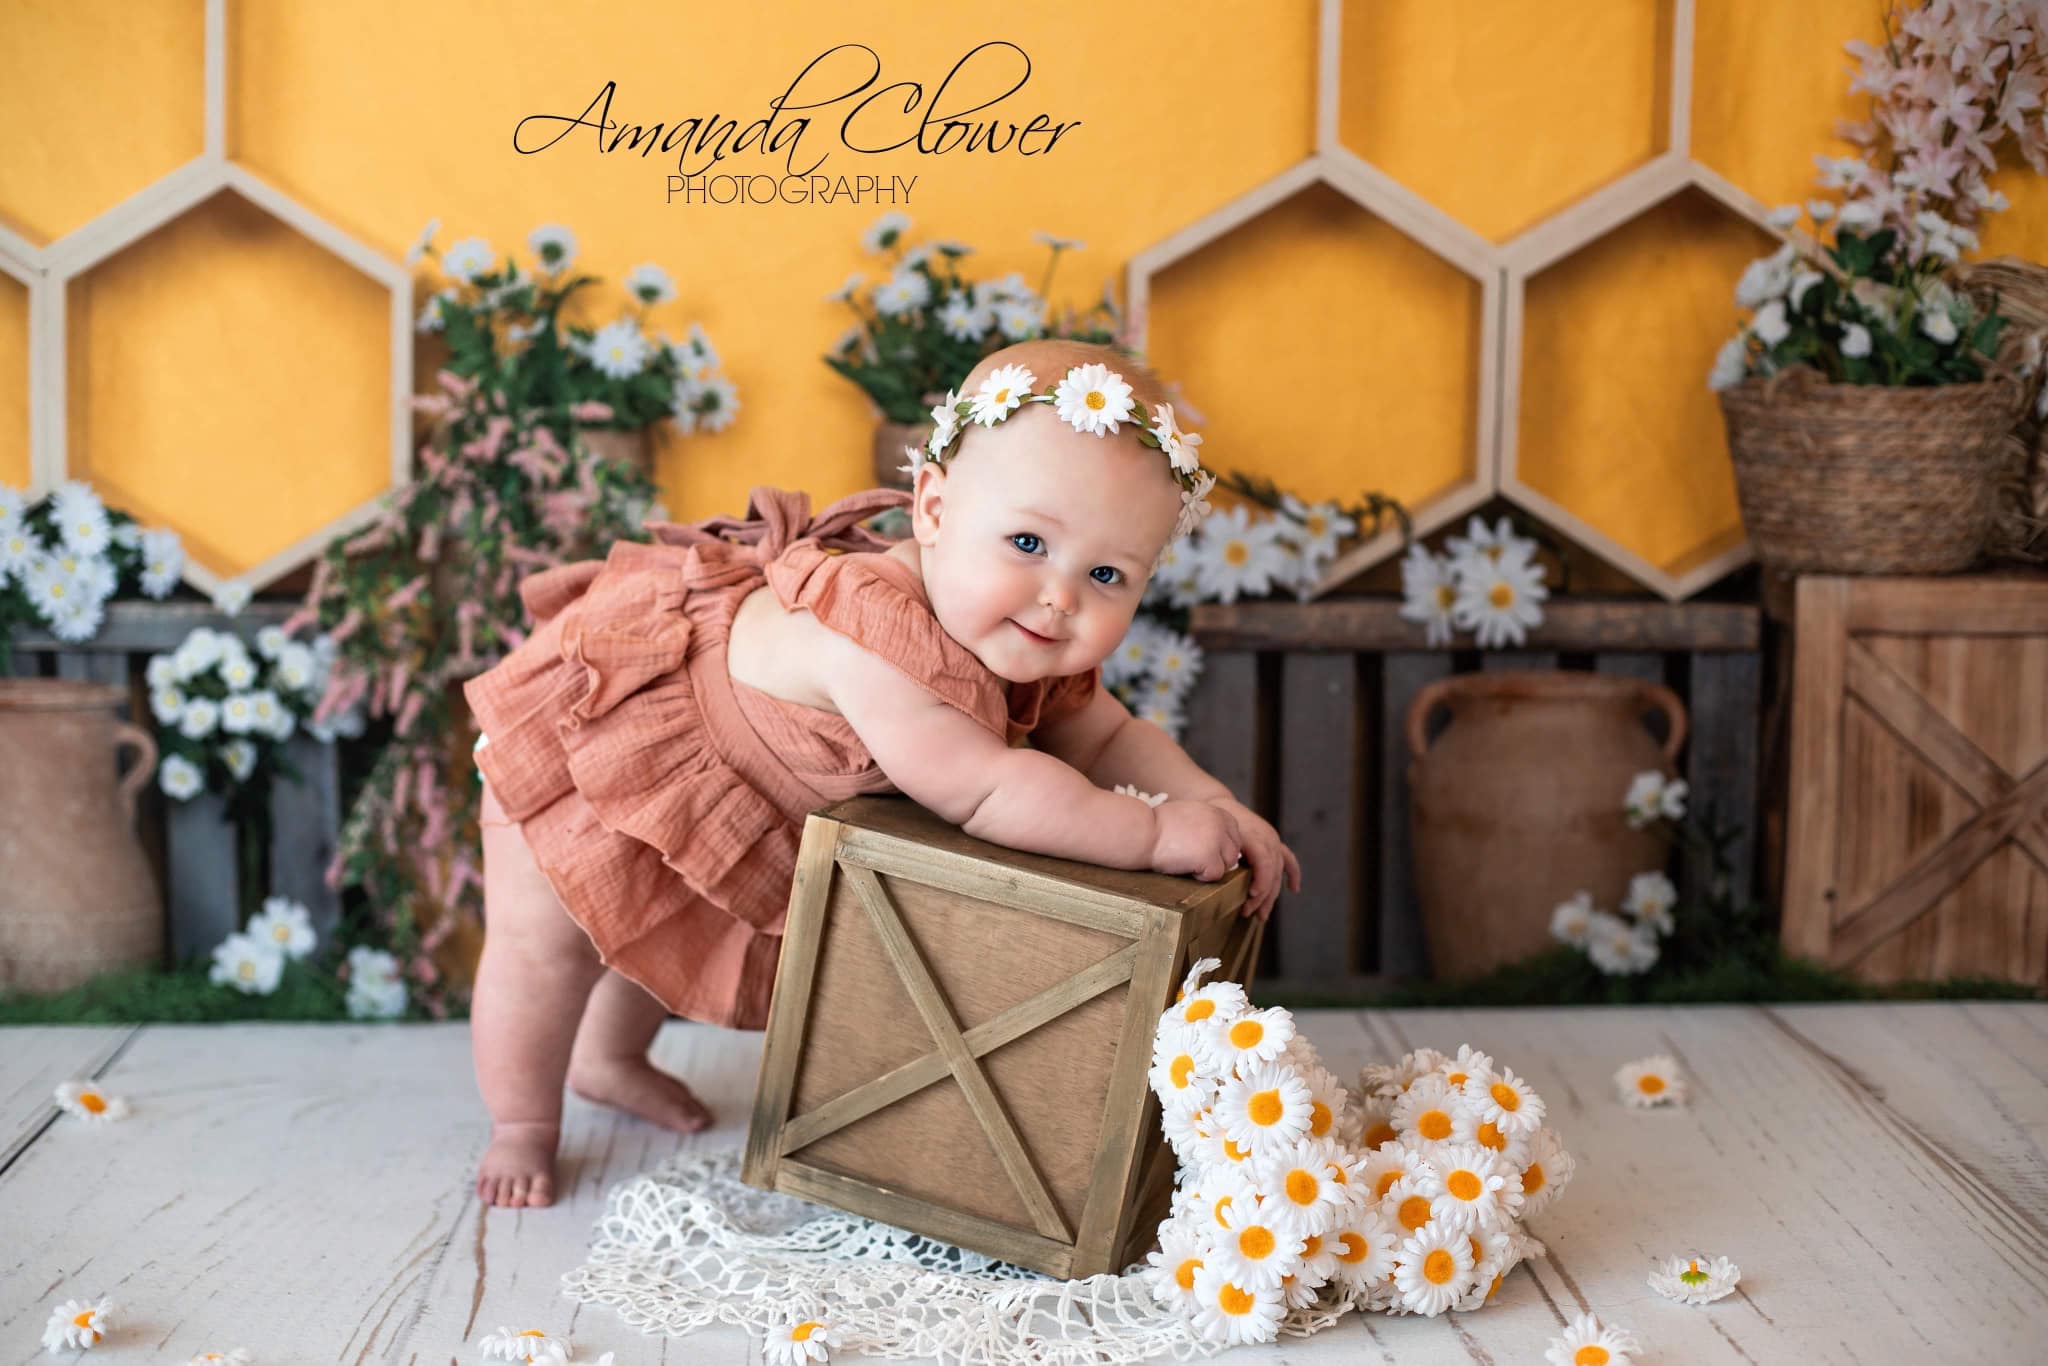 Kate Honeycomb Yellow Spring Backdrop Designed by Emetselch